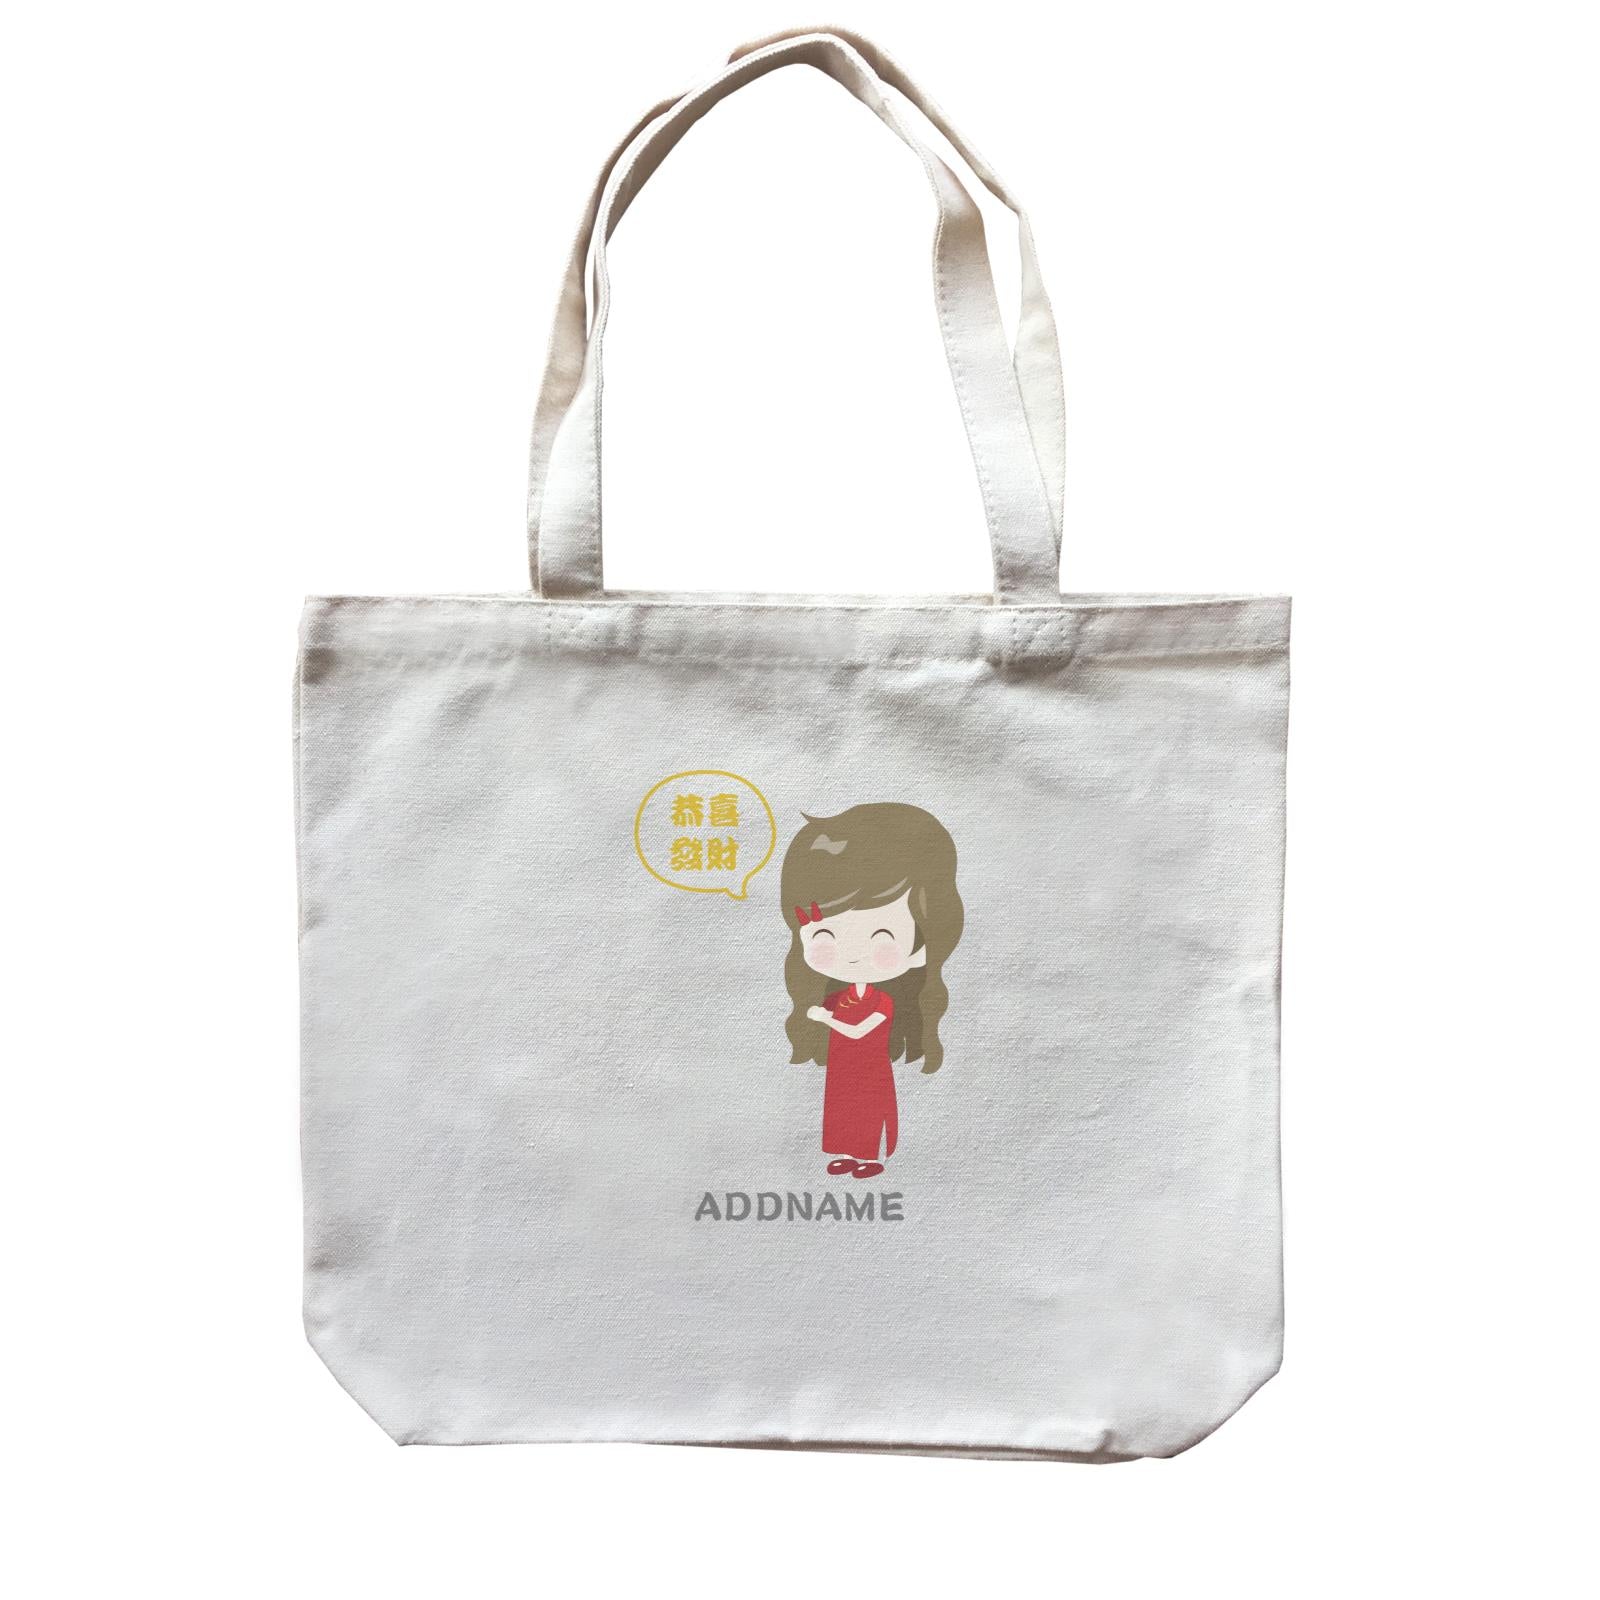 Chinese New Year Family Gong Xi Fai Cai Mommy Addname Canvas Bag